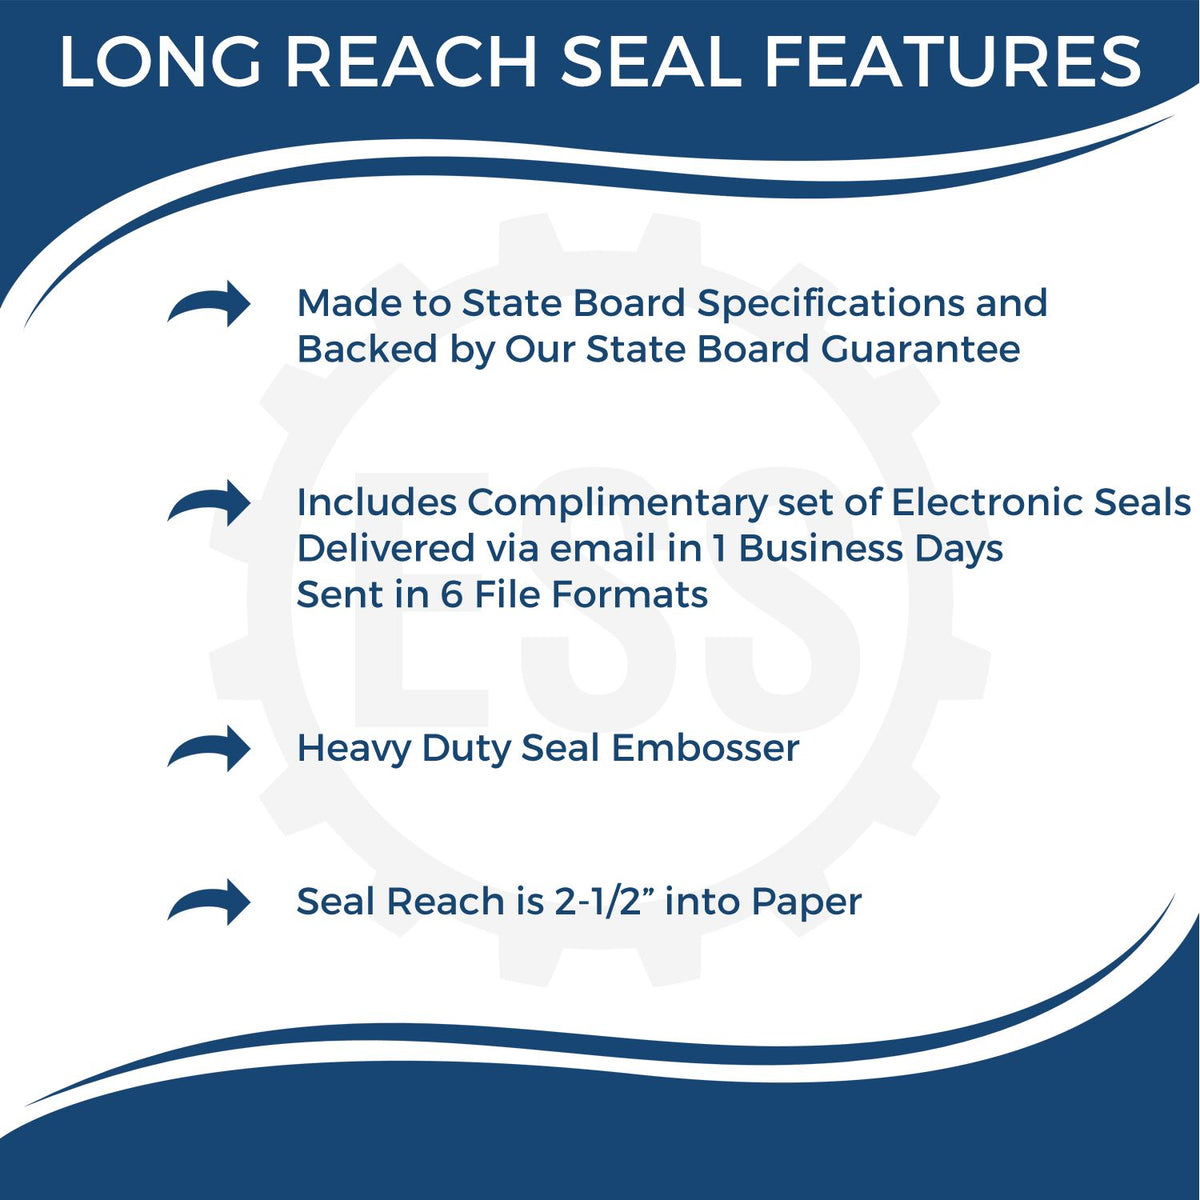 A picture of an infographic highlighting the selling points for the Long Reach Mississippi Geology Seal